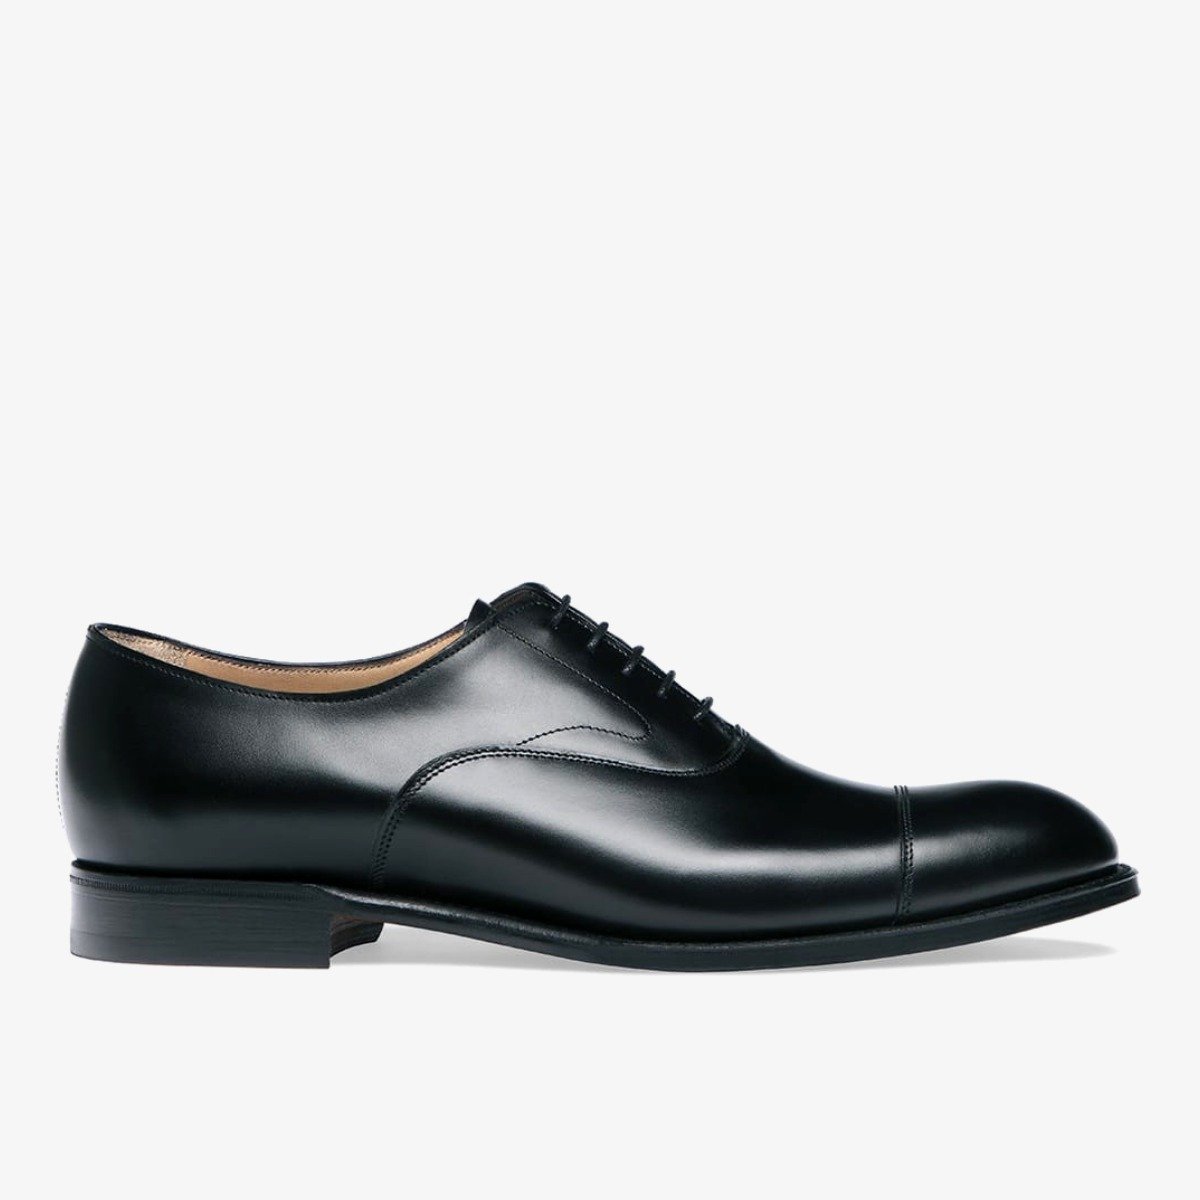 Cheaney Alfred black toe cap oxford shoes - Rubber soles